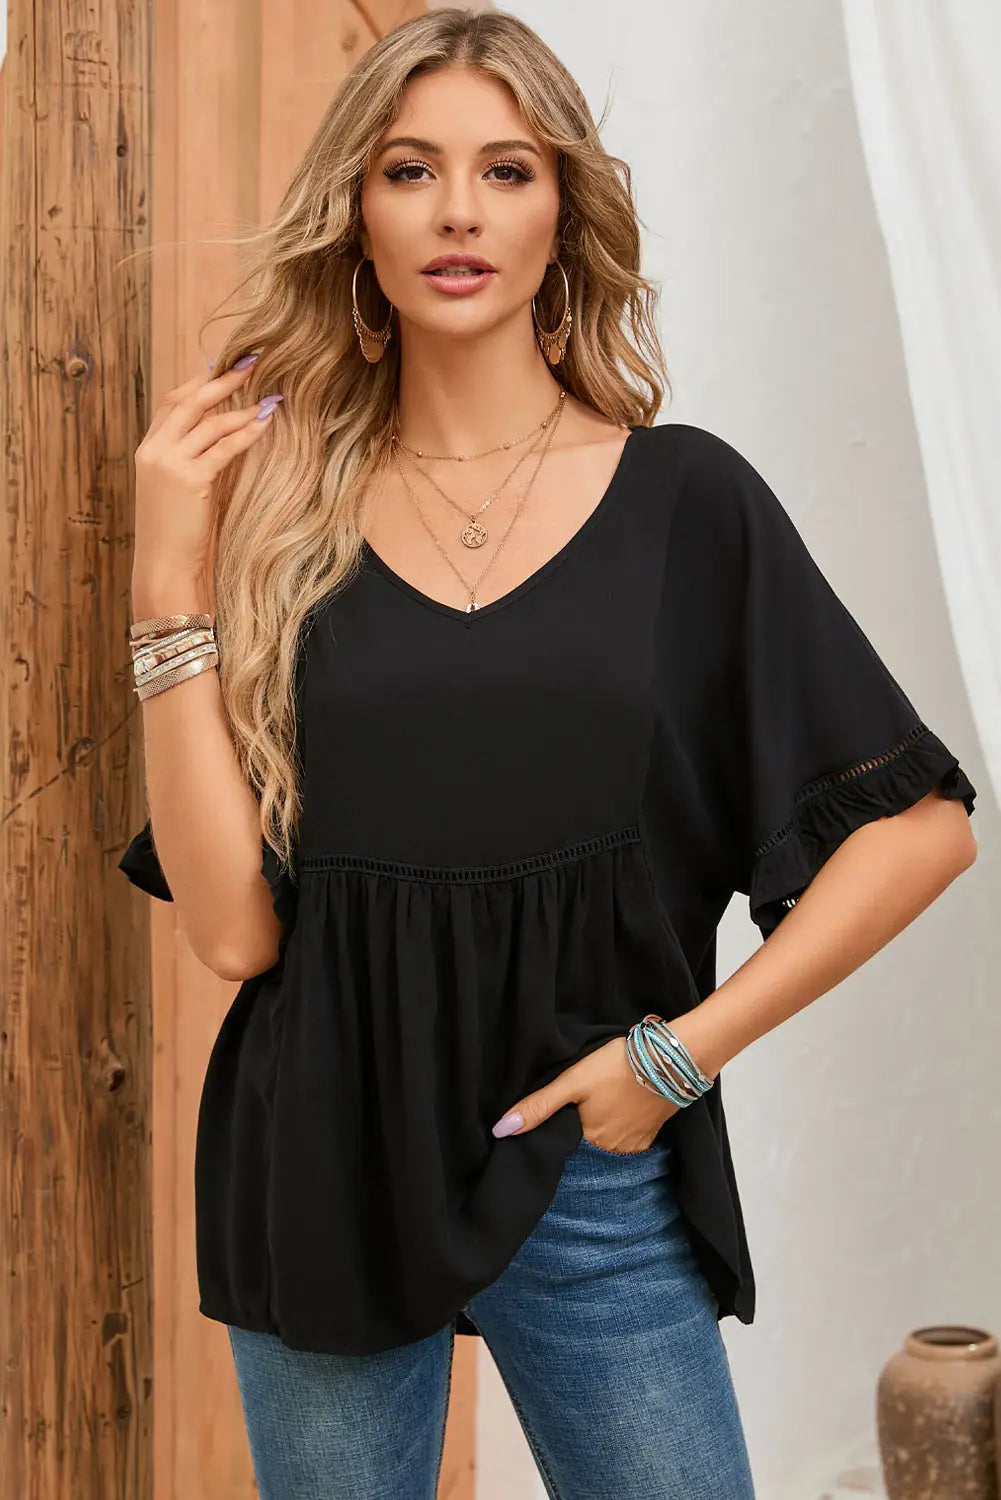 Apricot ruffled lace detail loose v neck top - tops